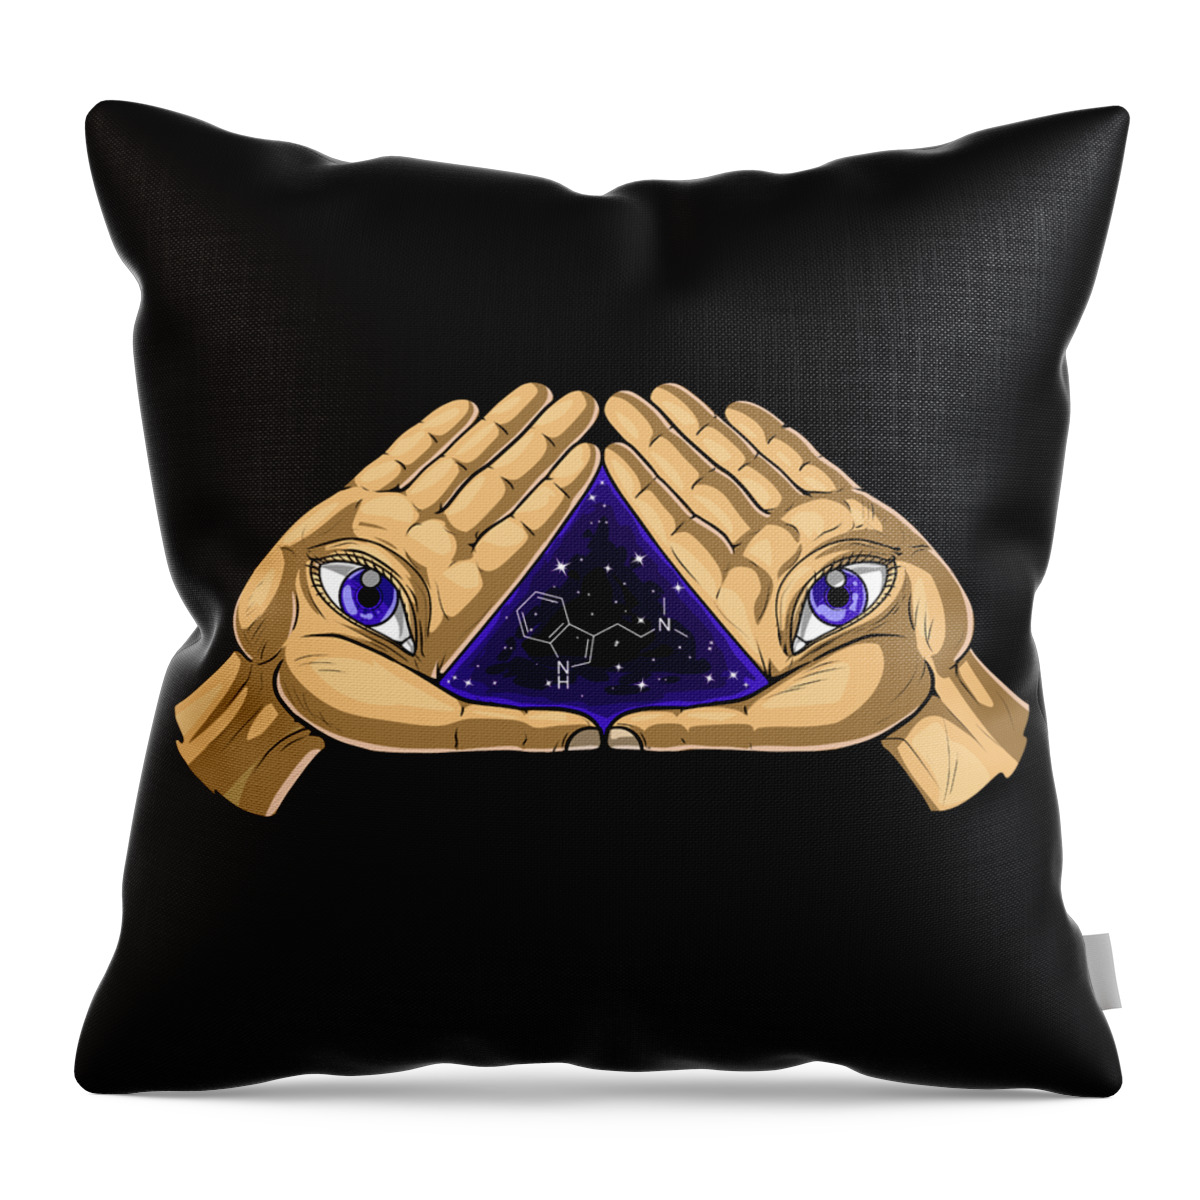 Dmt Throw Pillow featuring the digital art Psychedelic DMT Molecule by Nikolay Todorov